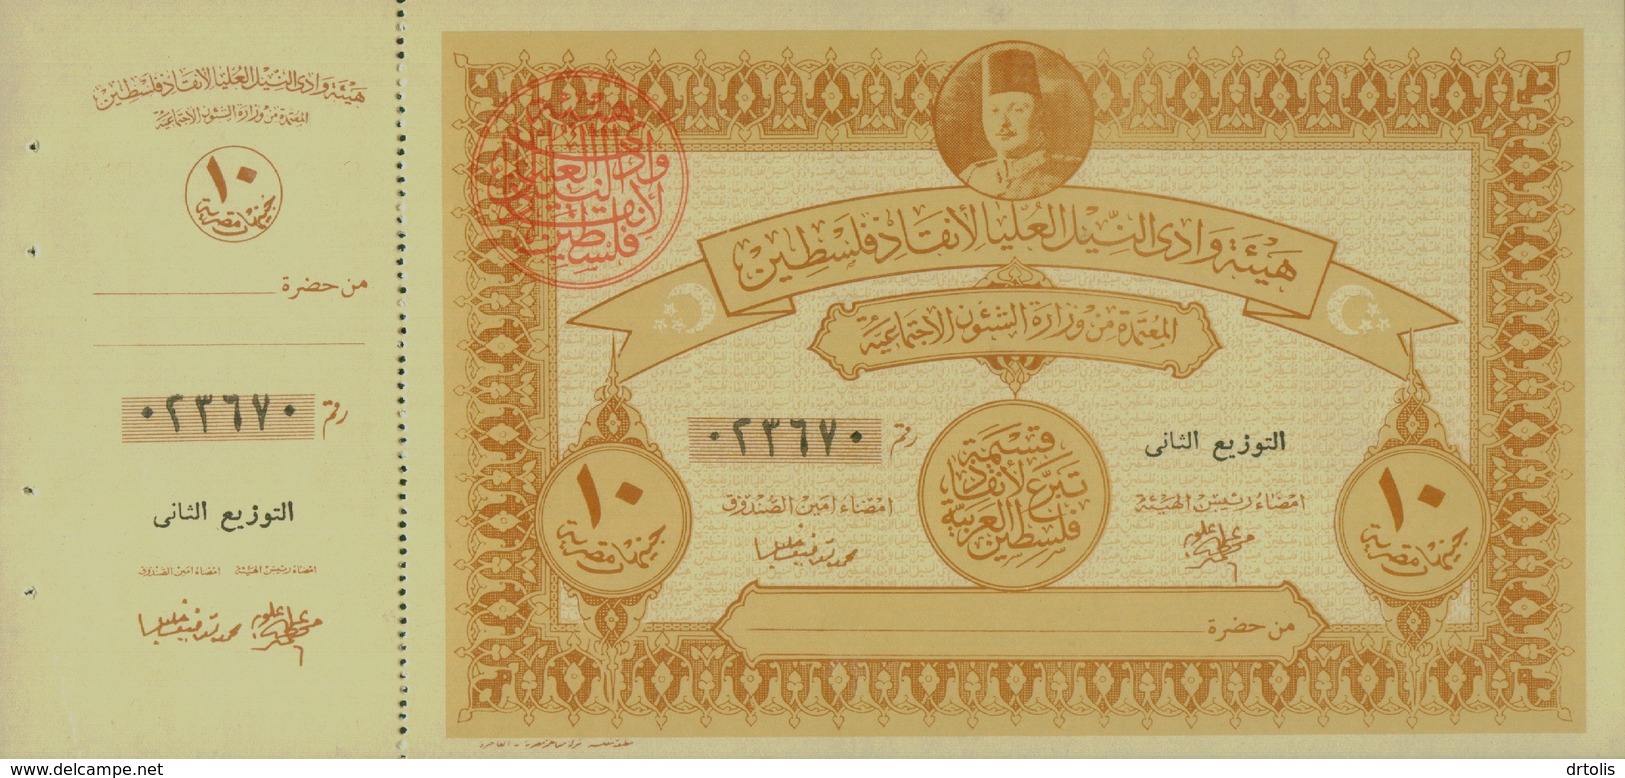 EGYPT / 1948 / KING FAROK DONATION TO SAVE PALESTINE / UNCER. BONDS GROUP OF 7 / 7 SCANS . - Aegypten